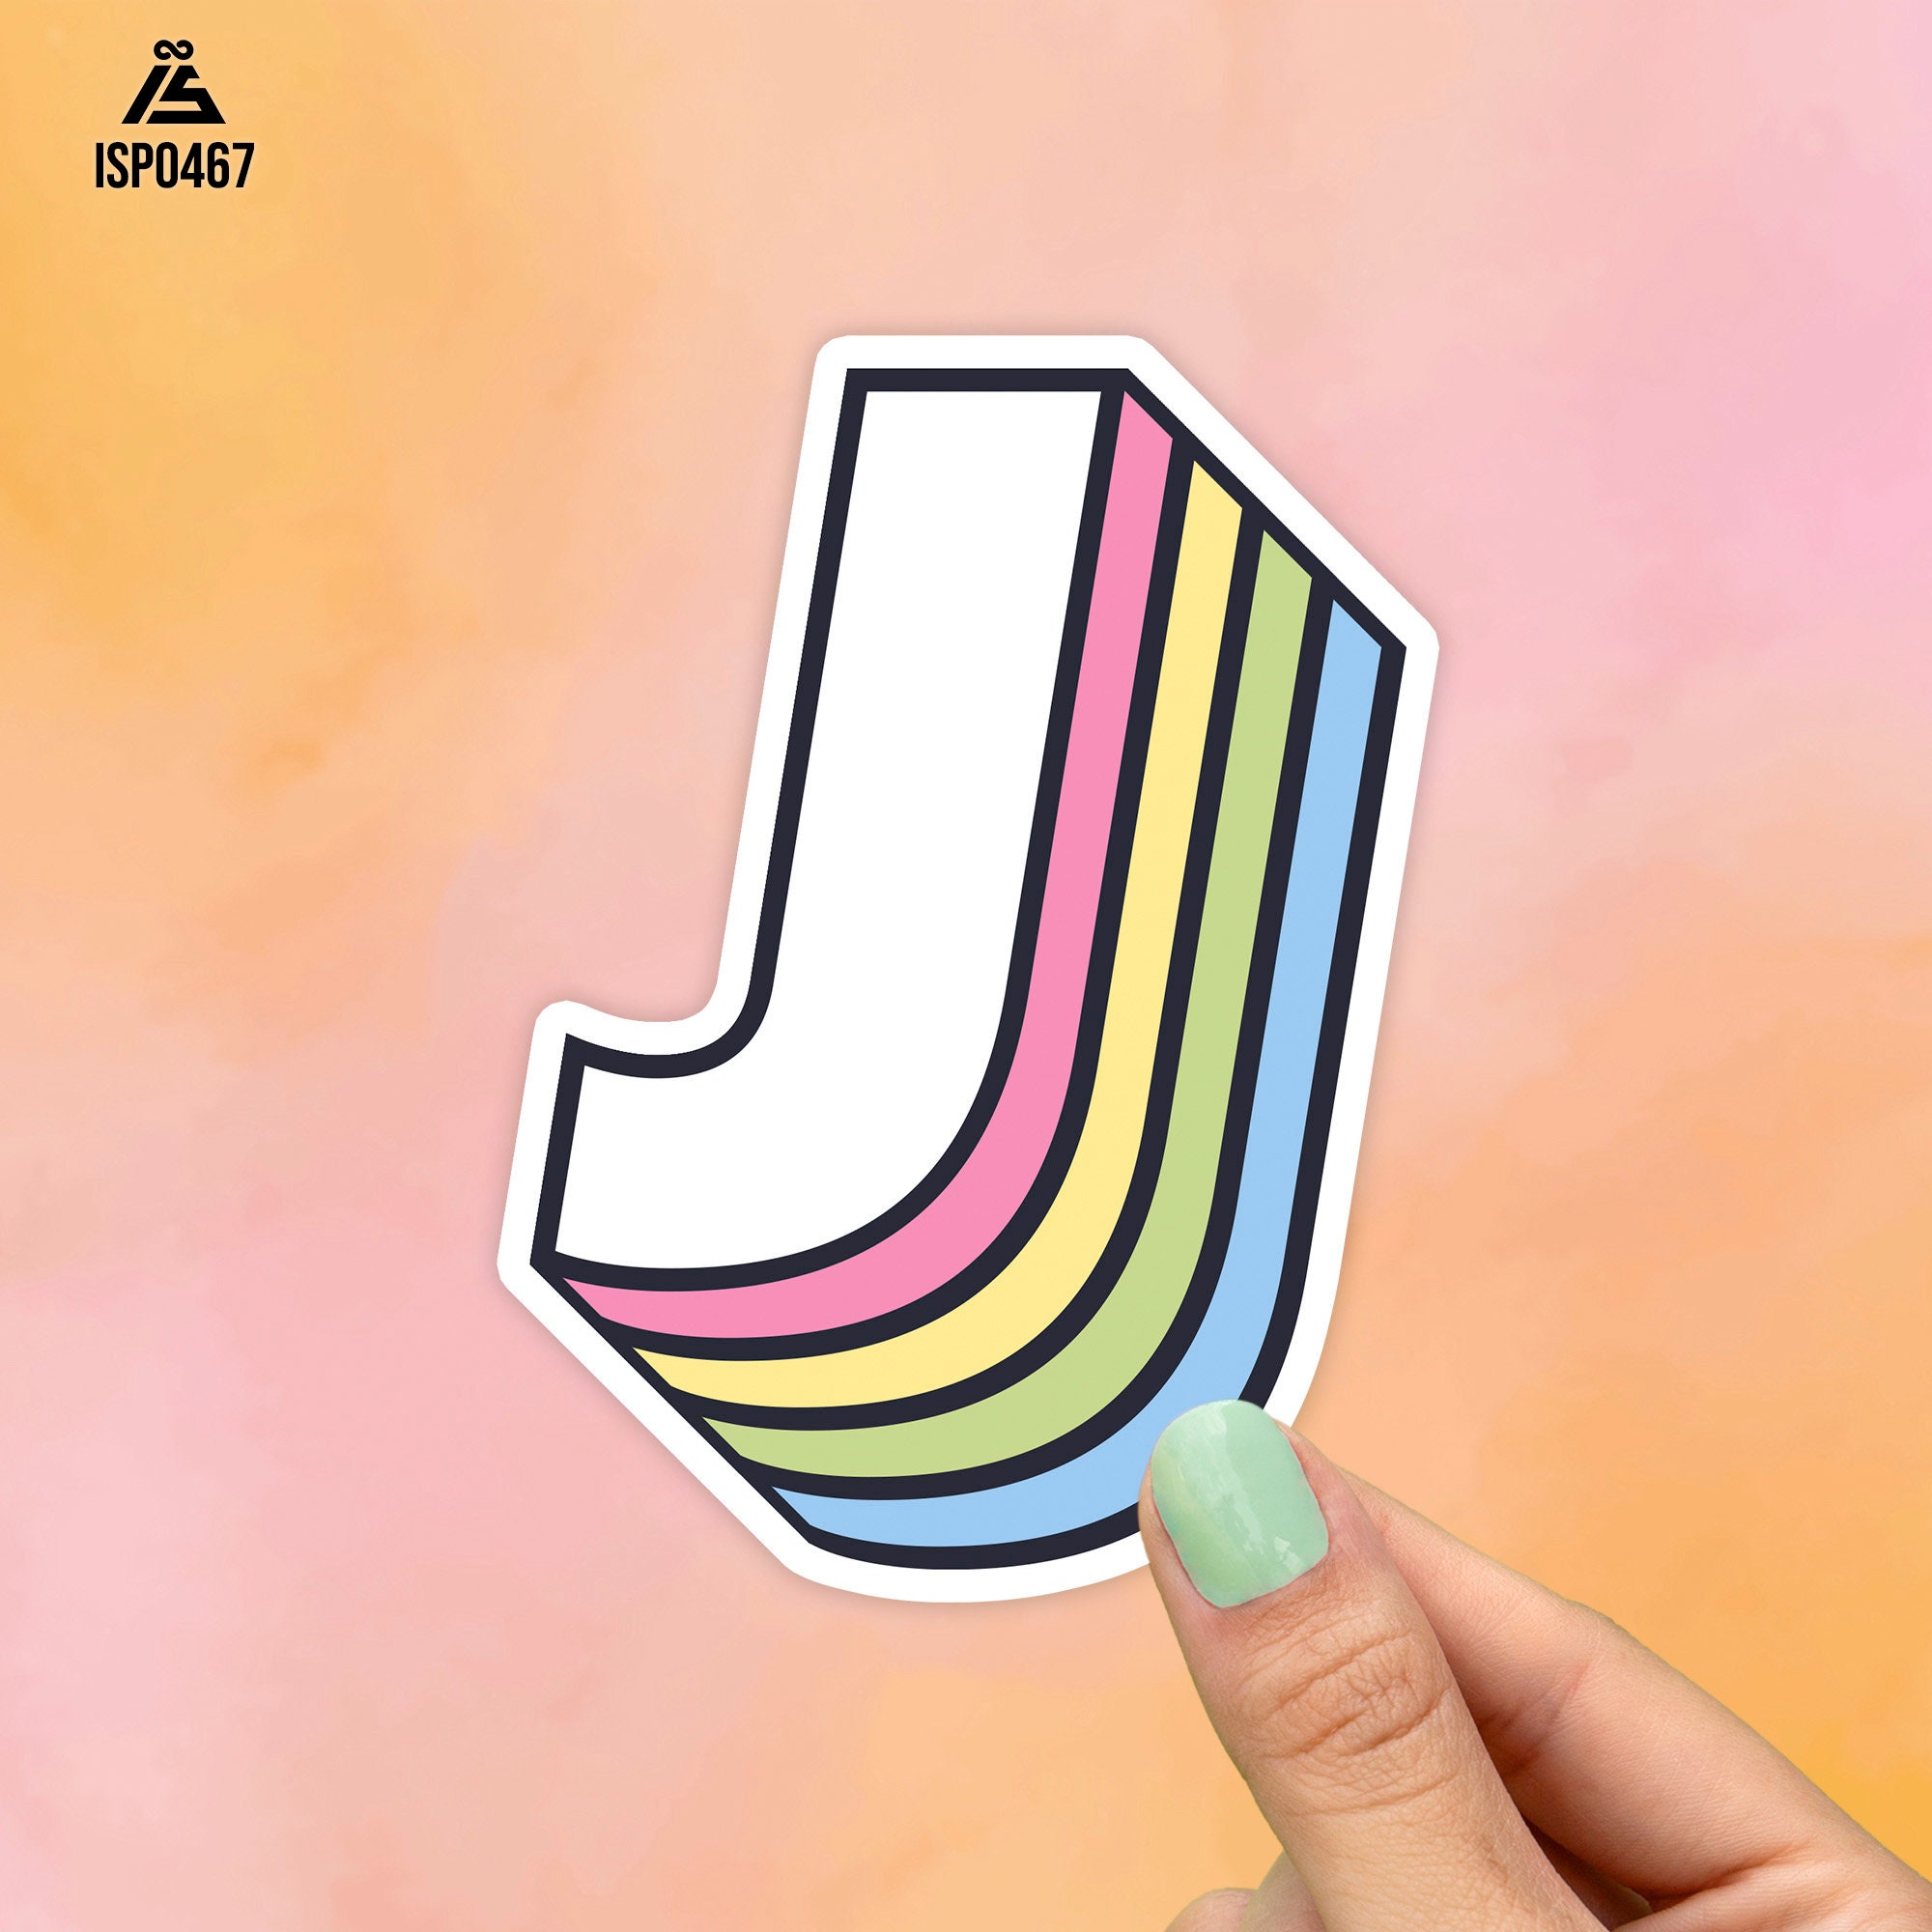 letter j black Sticker for Sale by ZiphGames